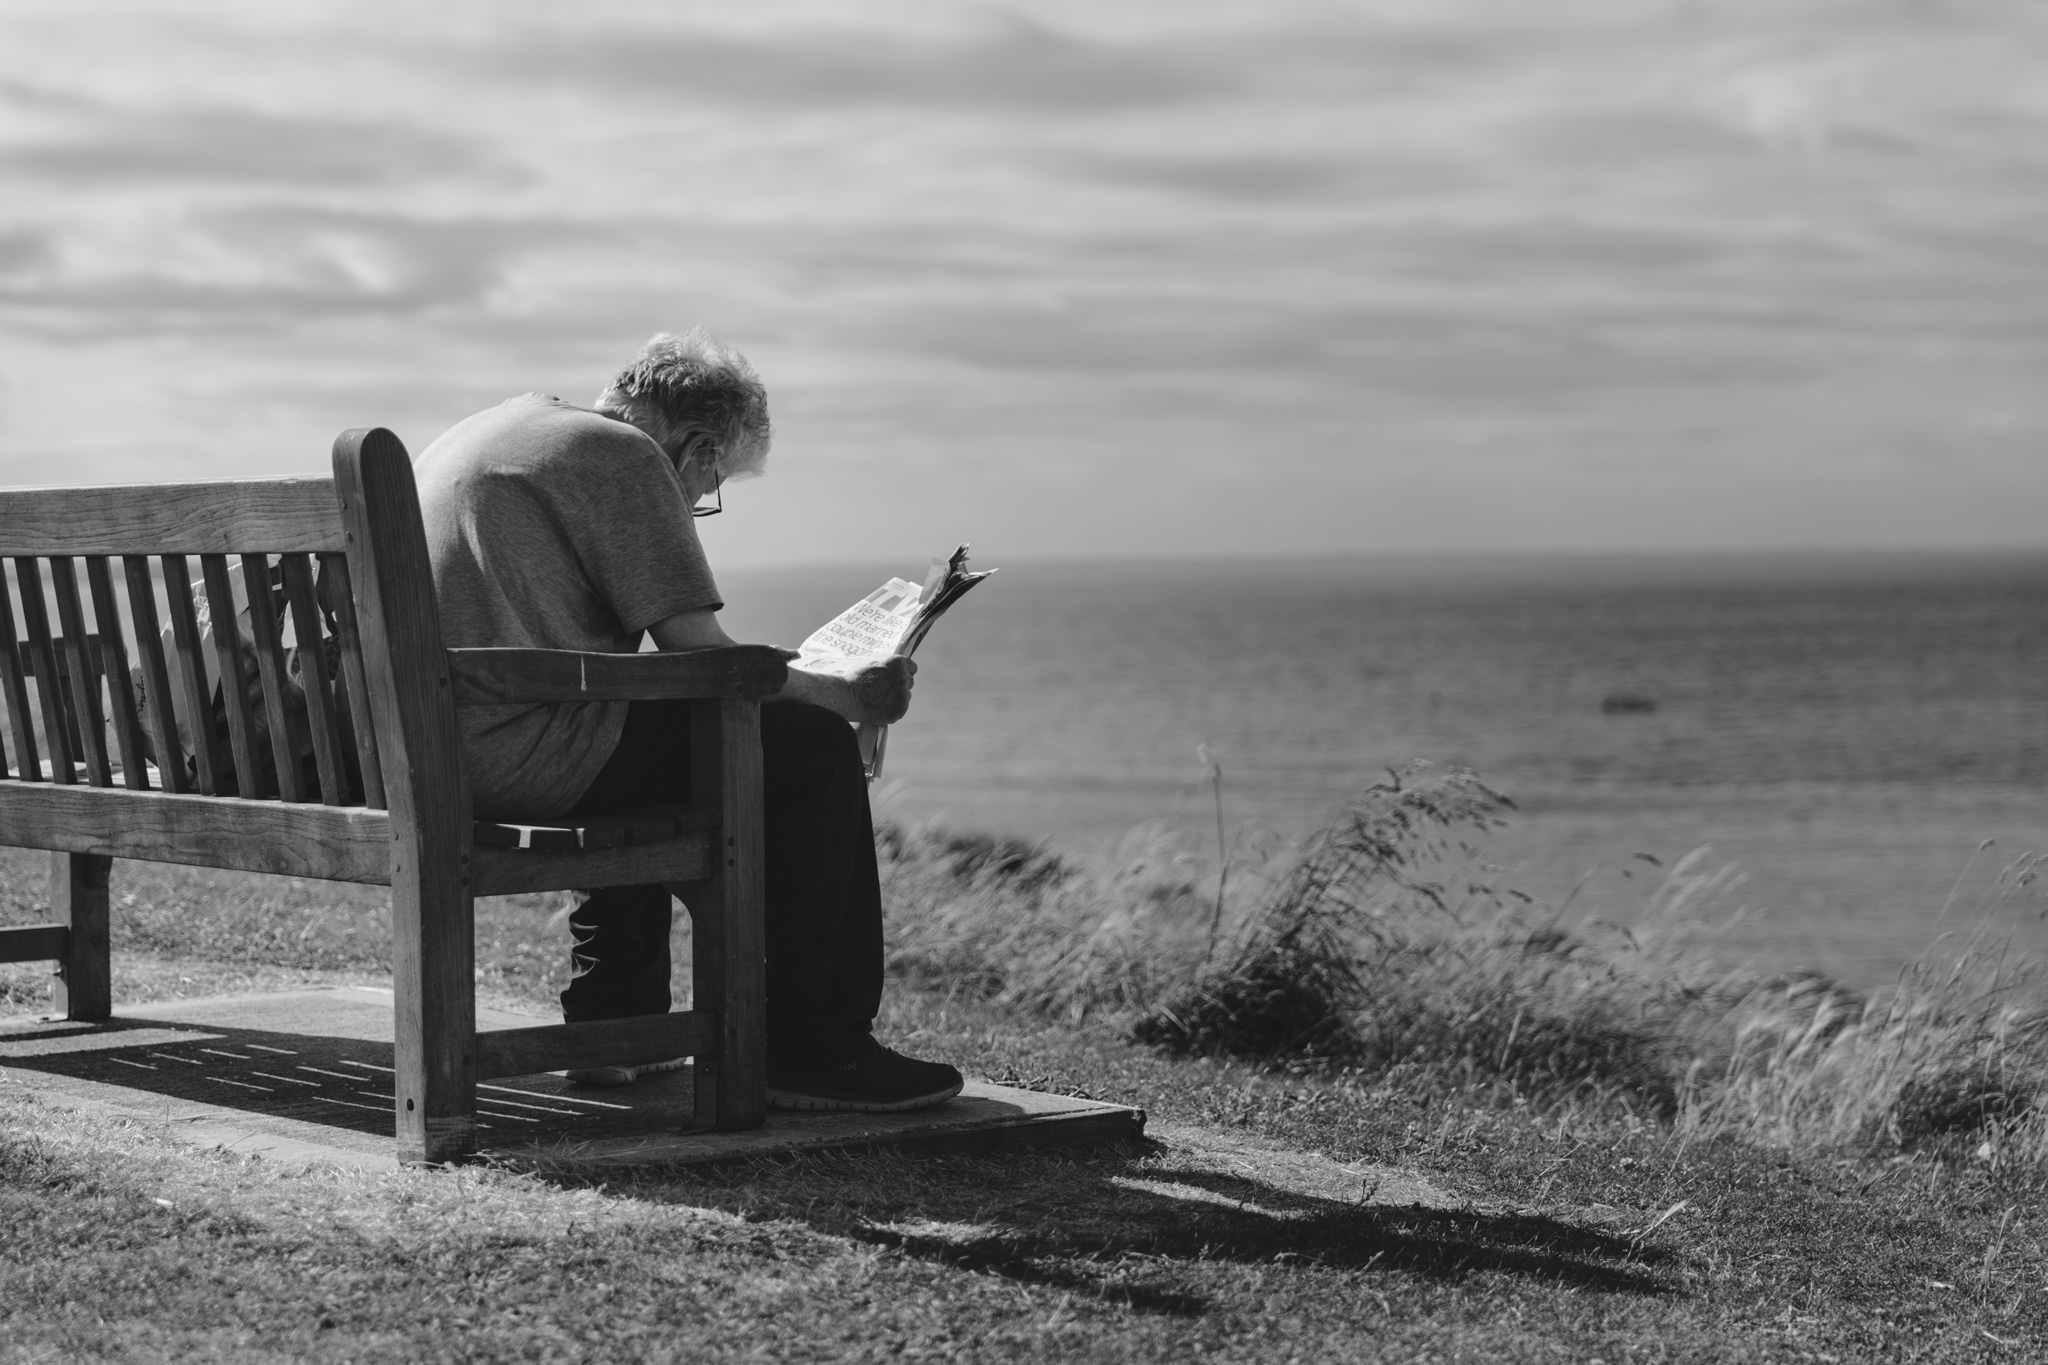 Man outdoors on bench near coast struggling to read a newspaper.